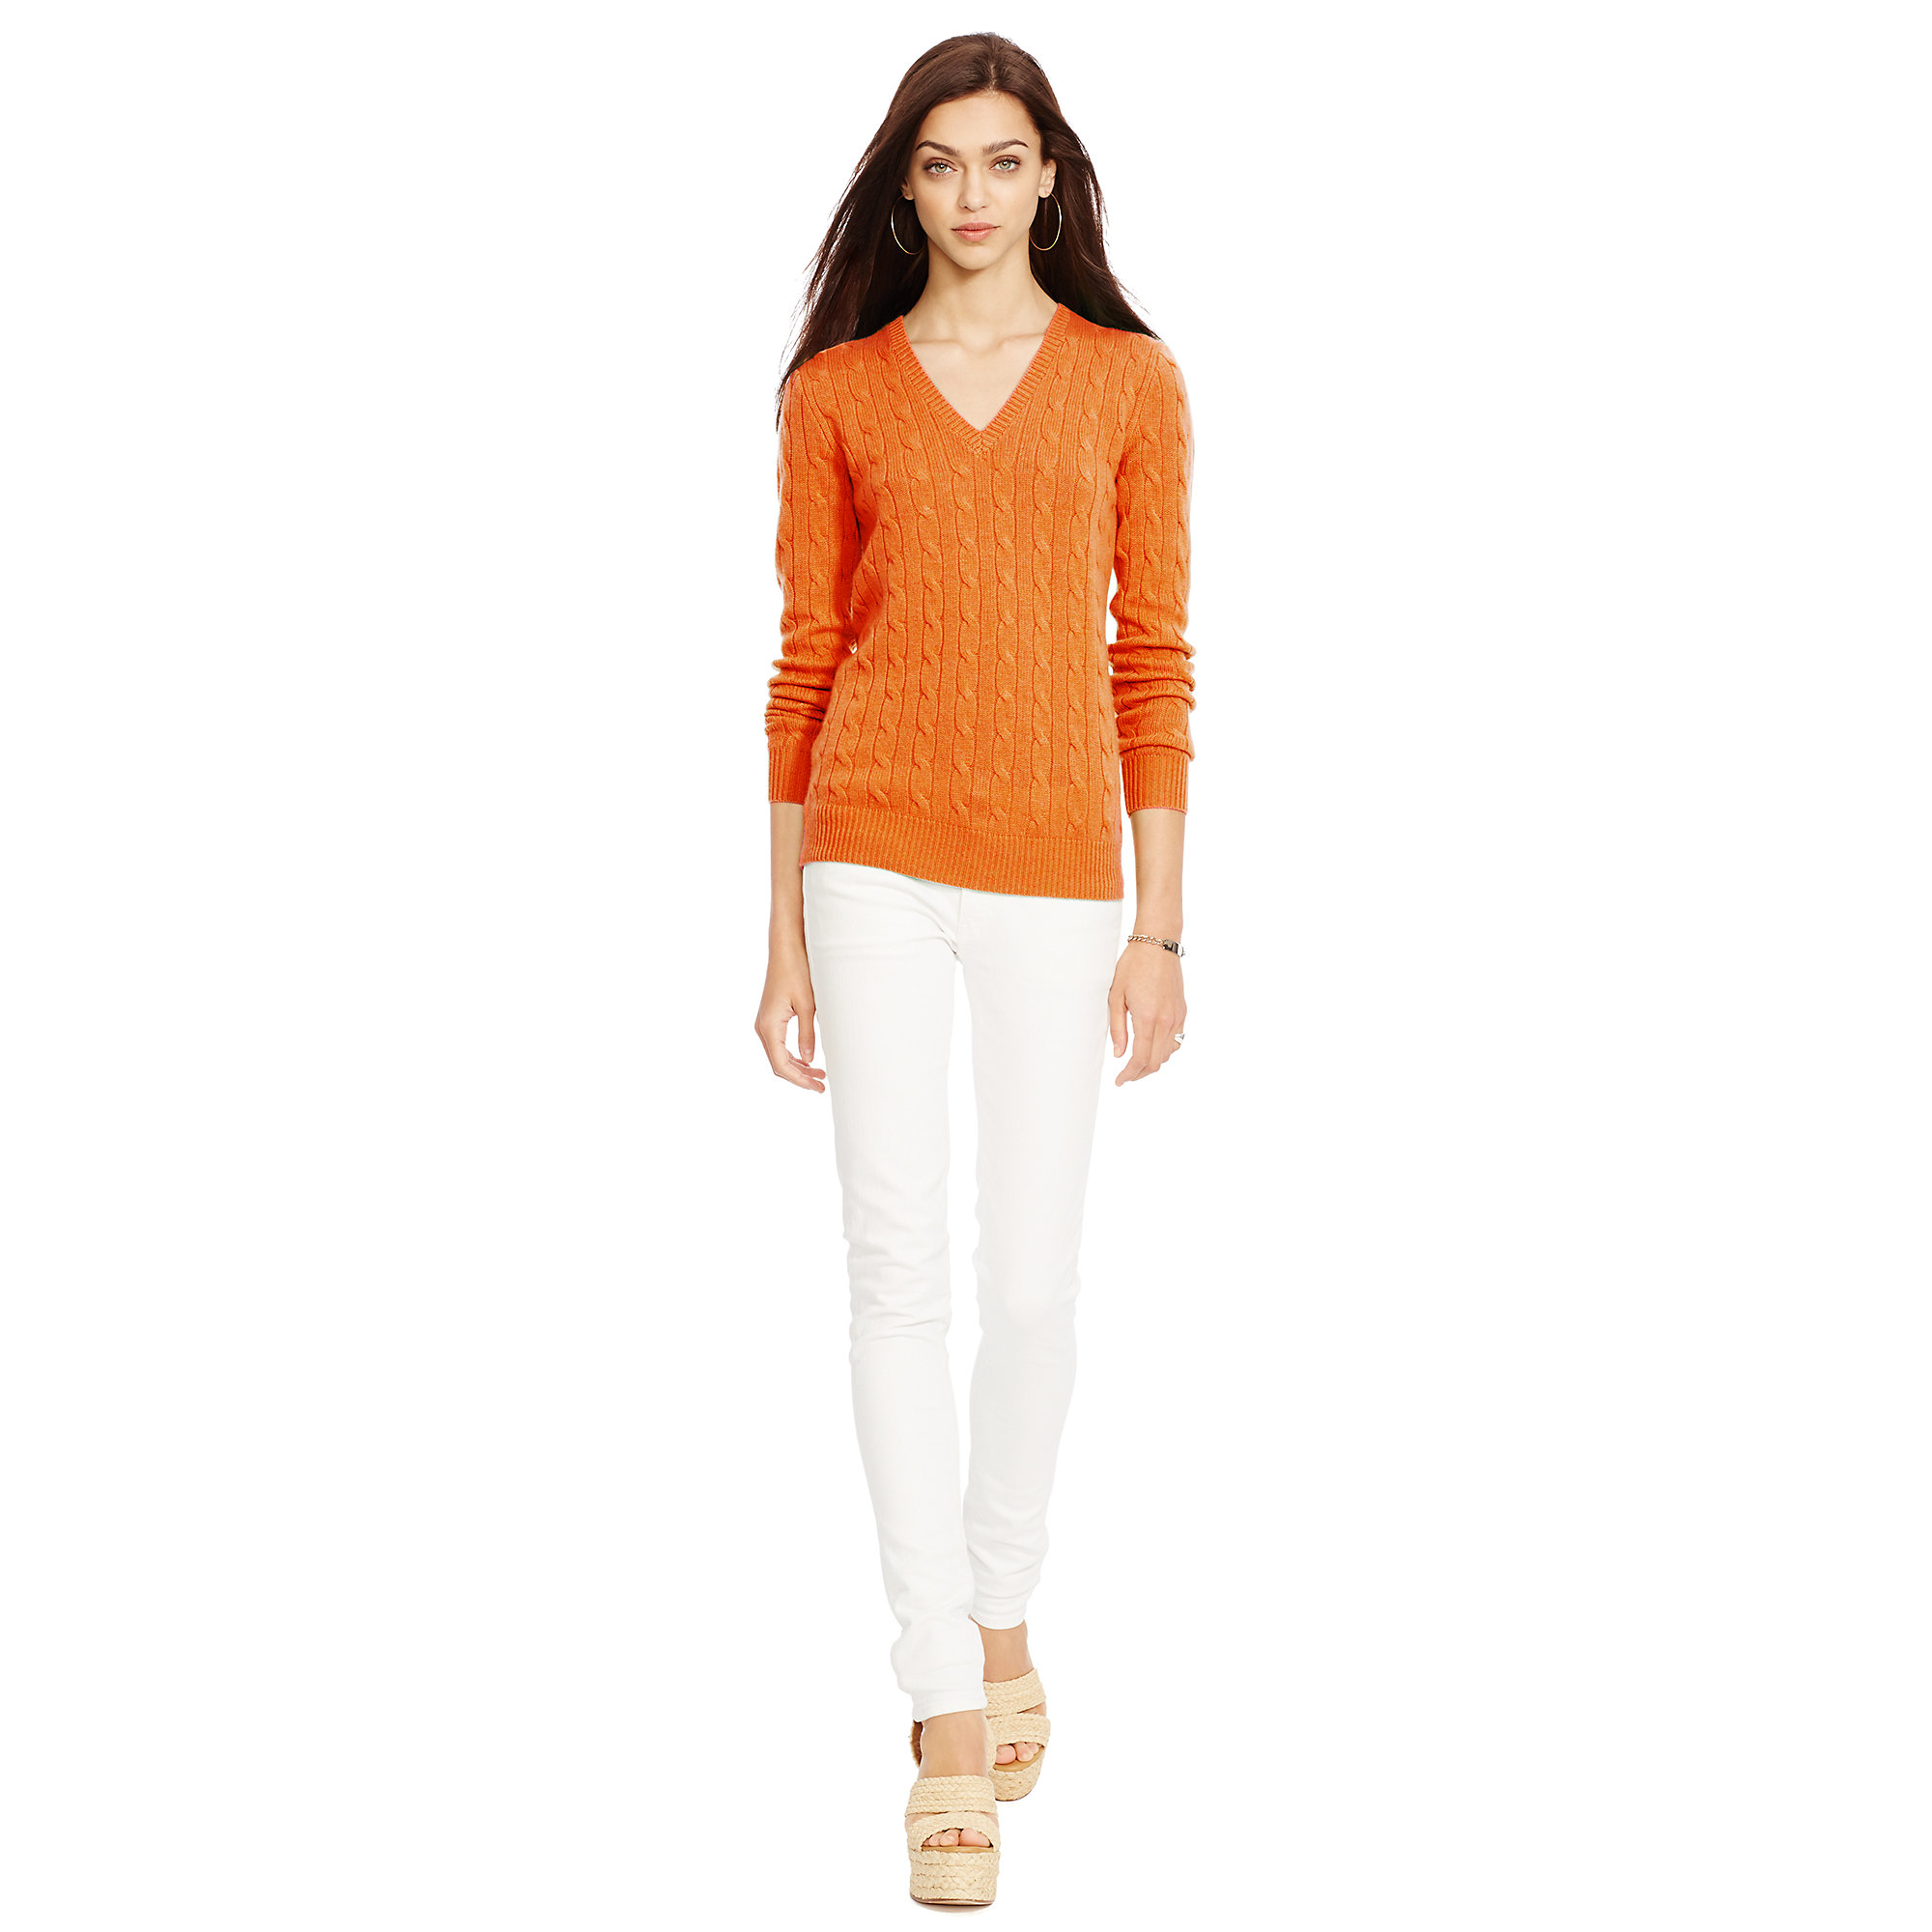 Lyst - Polo Ralph Lauren Cabled Cashmere V-Neck Sweater in Orange